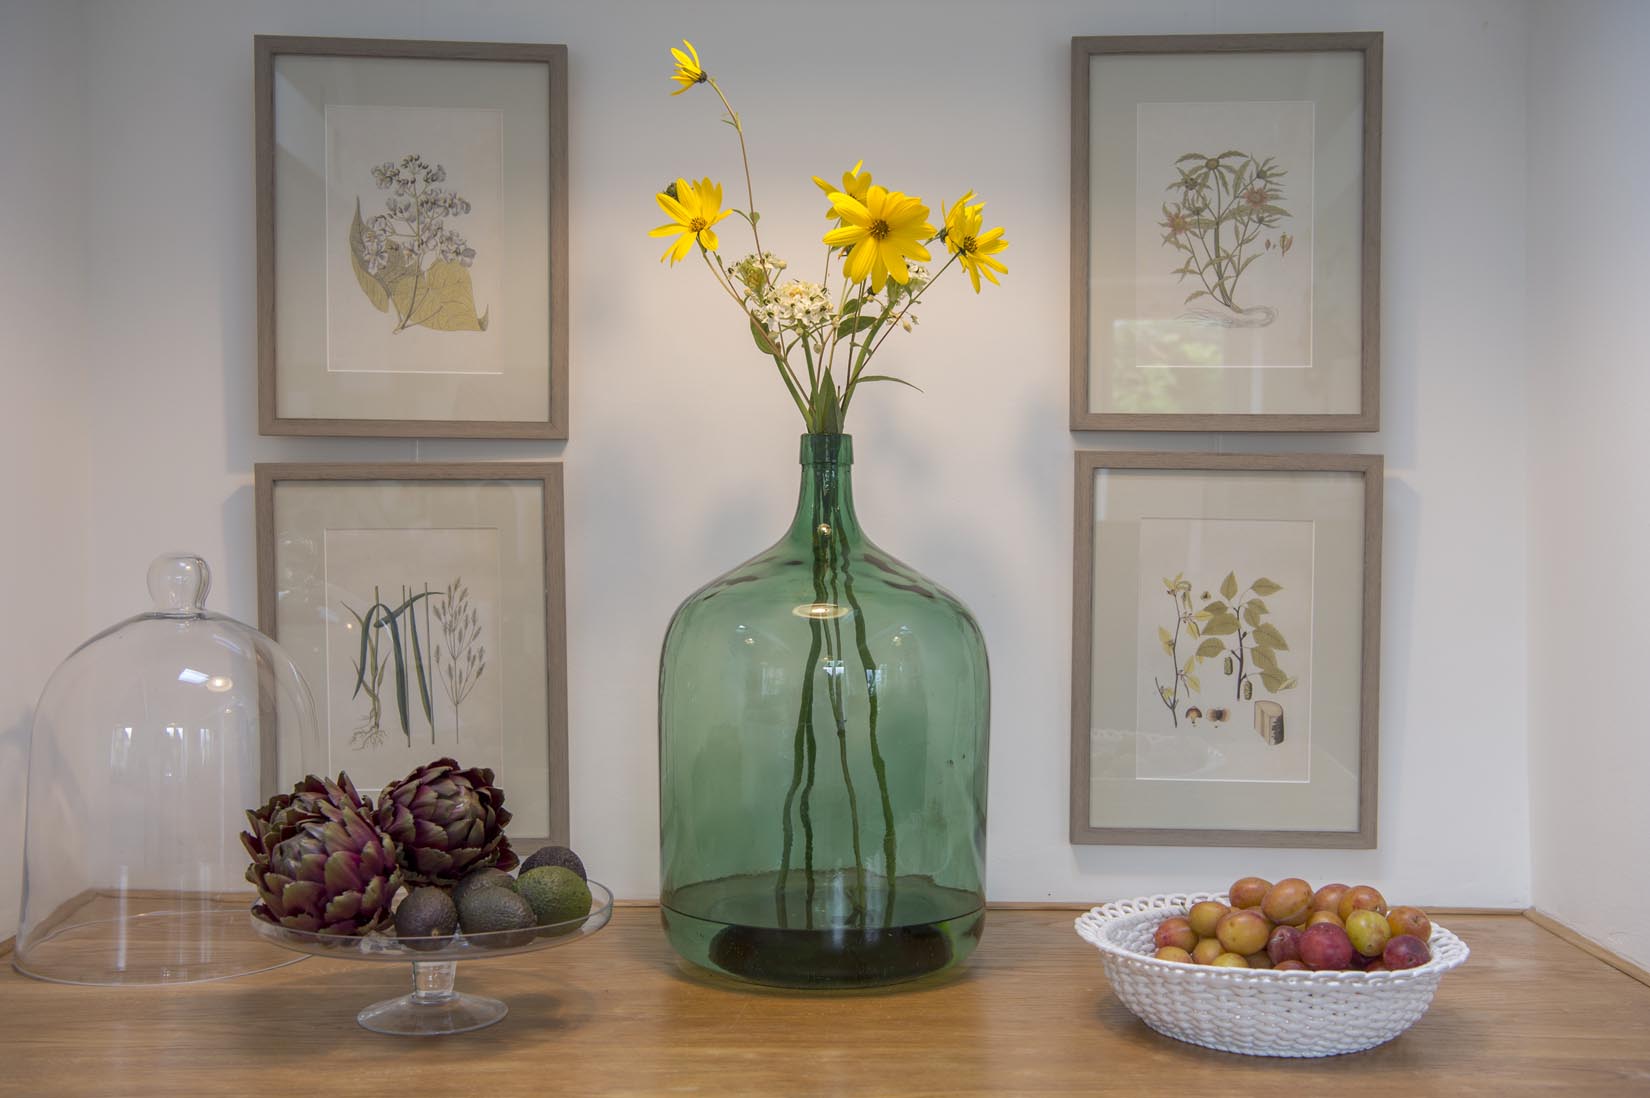 12 tips to Create gorgeous displays with your wall art with same size frames - Natalia Willmott